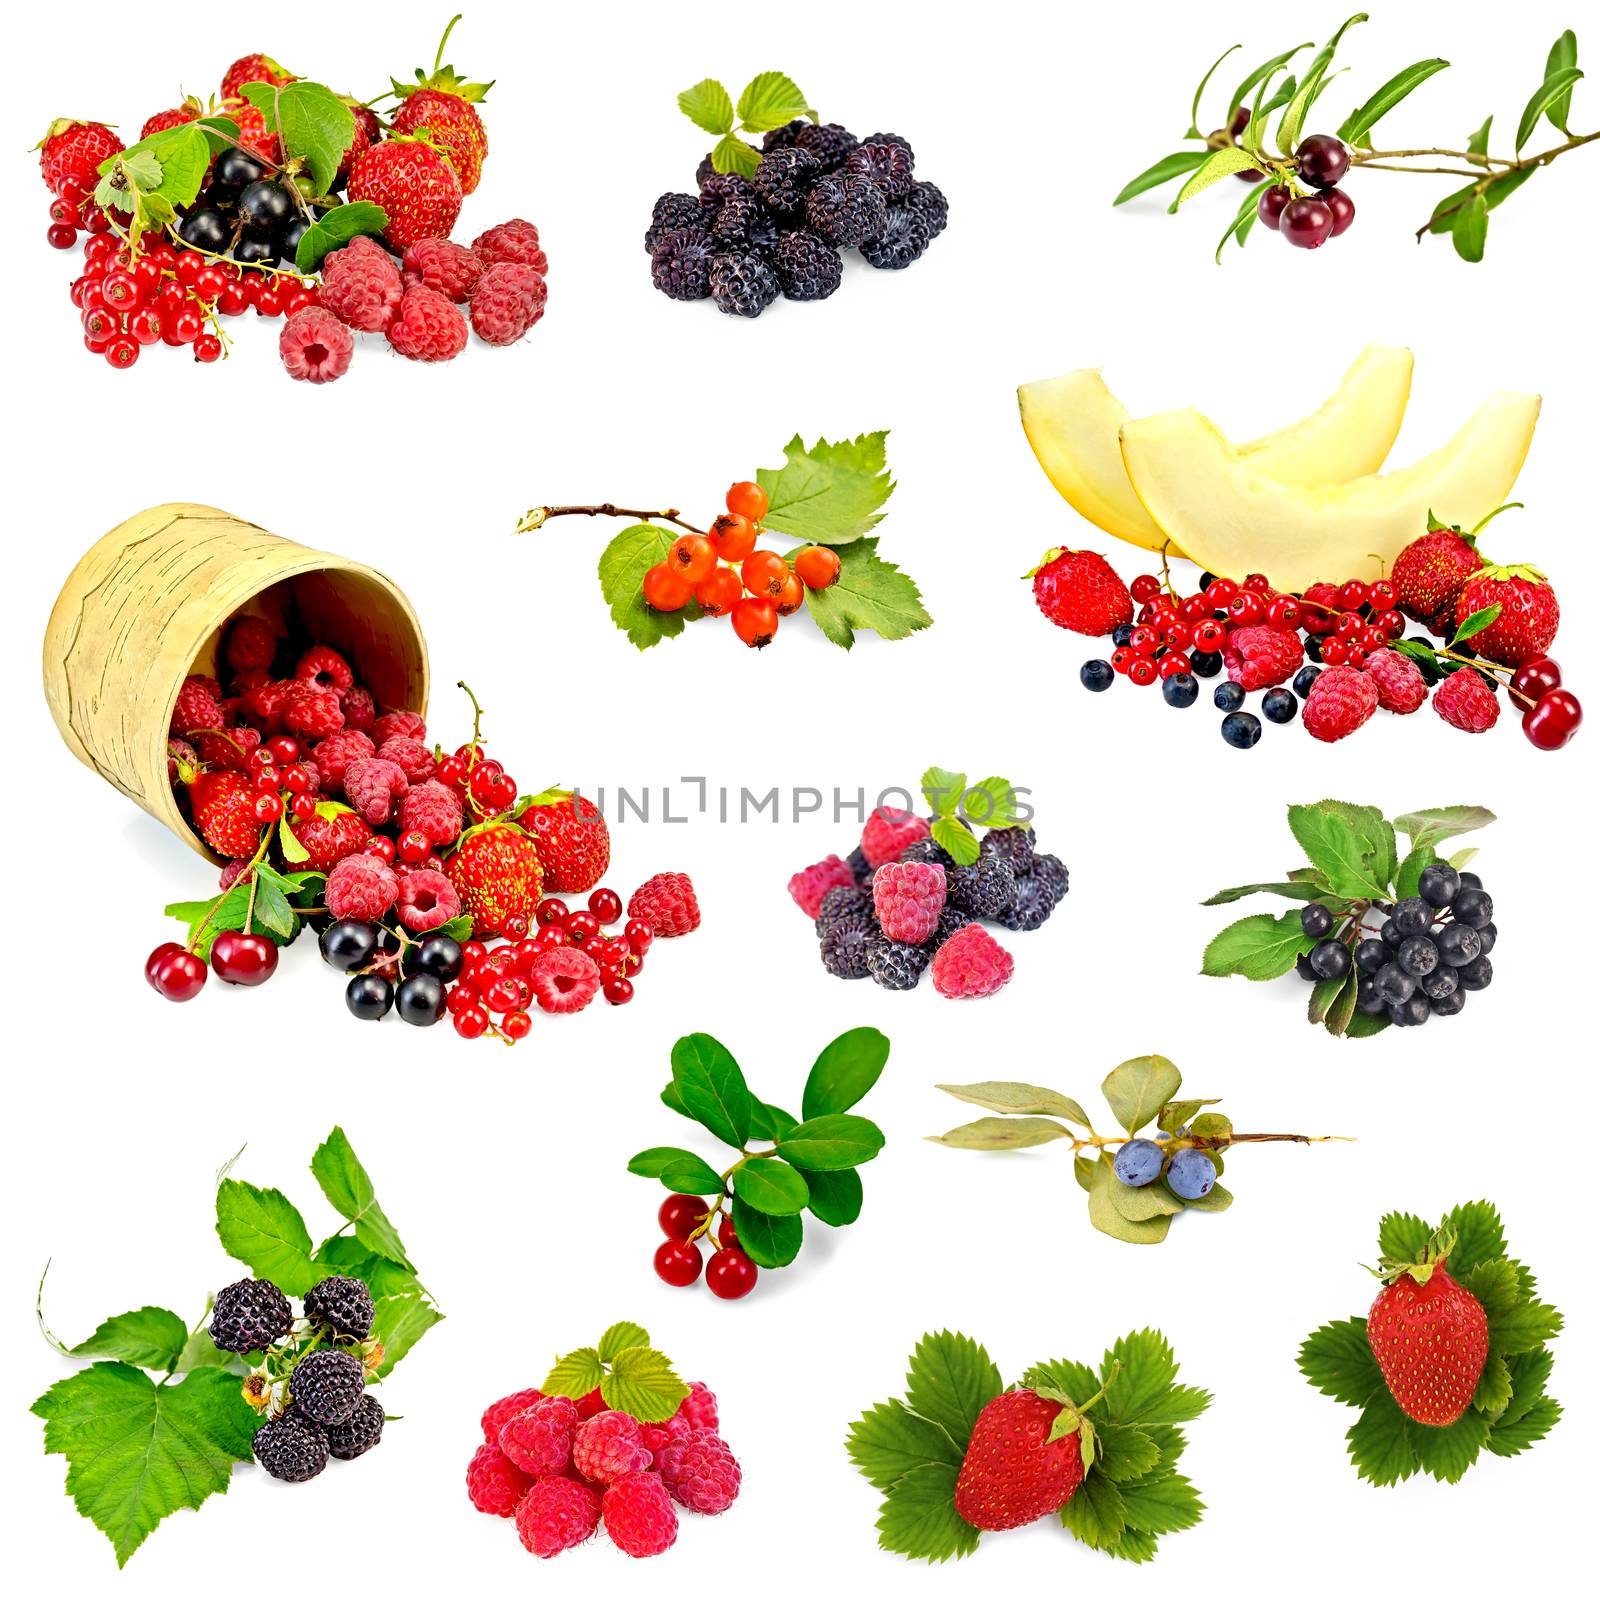 Set photos of raspberries, strawberries, blackberries, cranberries, hawthorn, cherry, chokeberry, black and red currants isolated on a white background